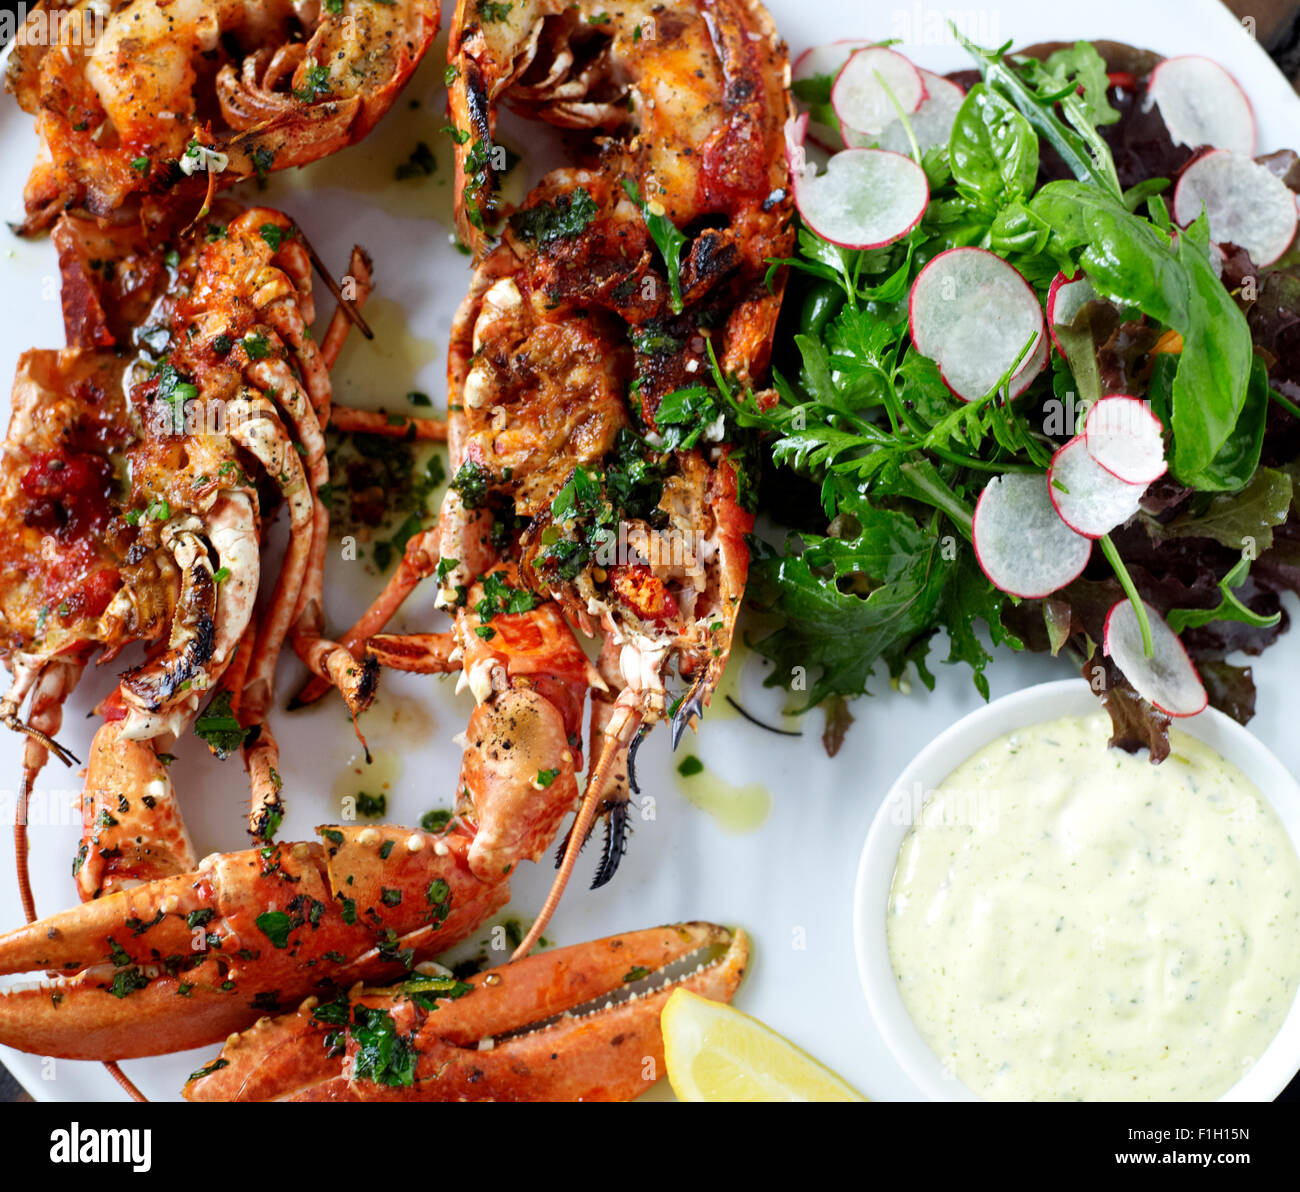 A closeup of Lobster and Shellfish presented on a plate with Lemon, Tartar sauce, seasoning, and a salad. Stock Photo